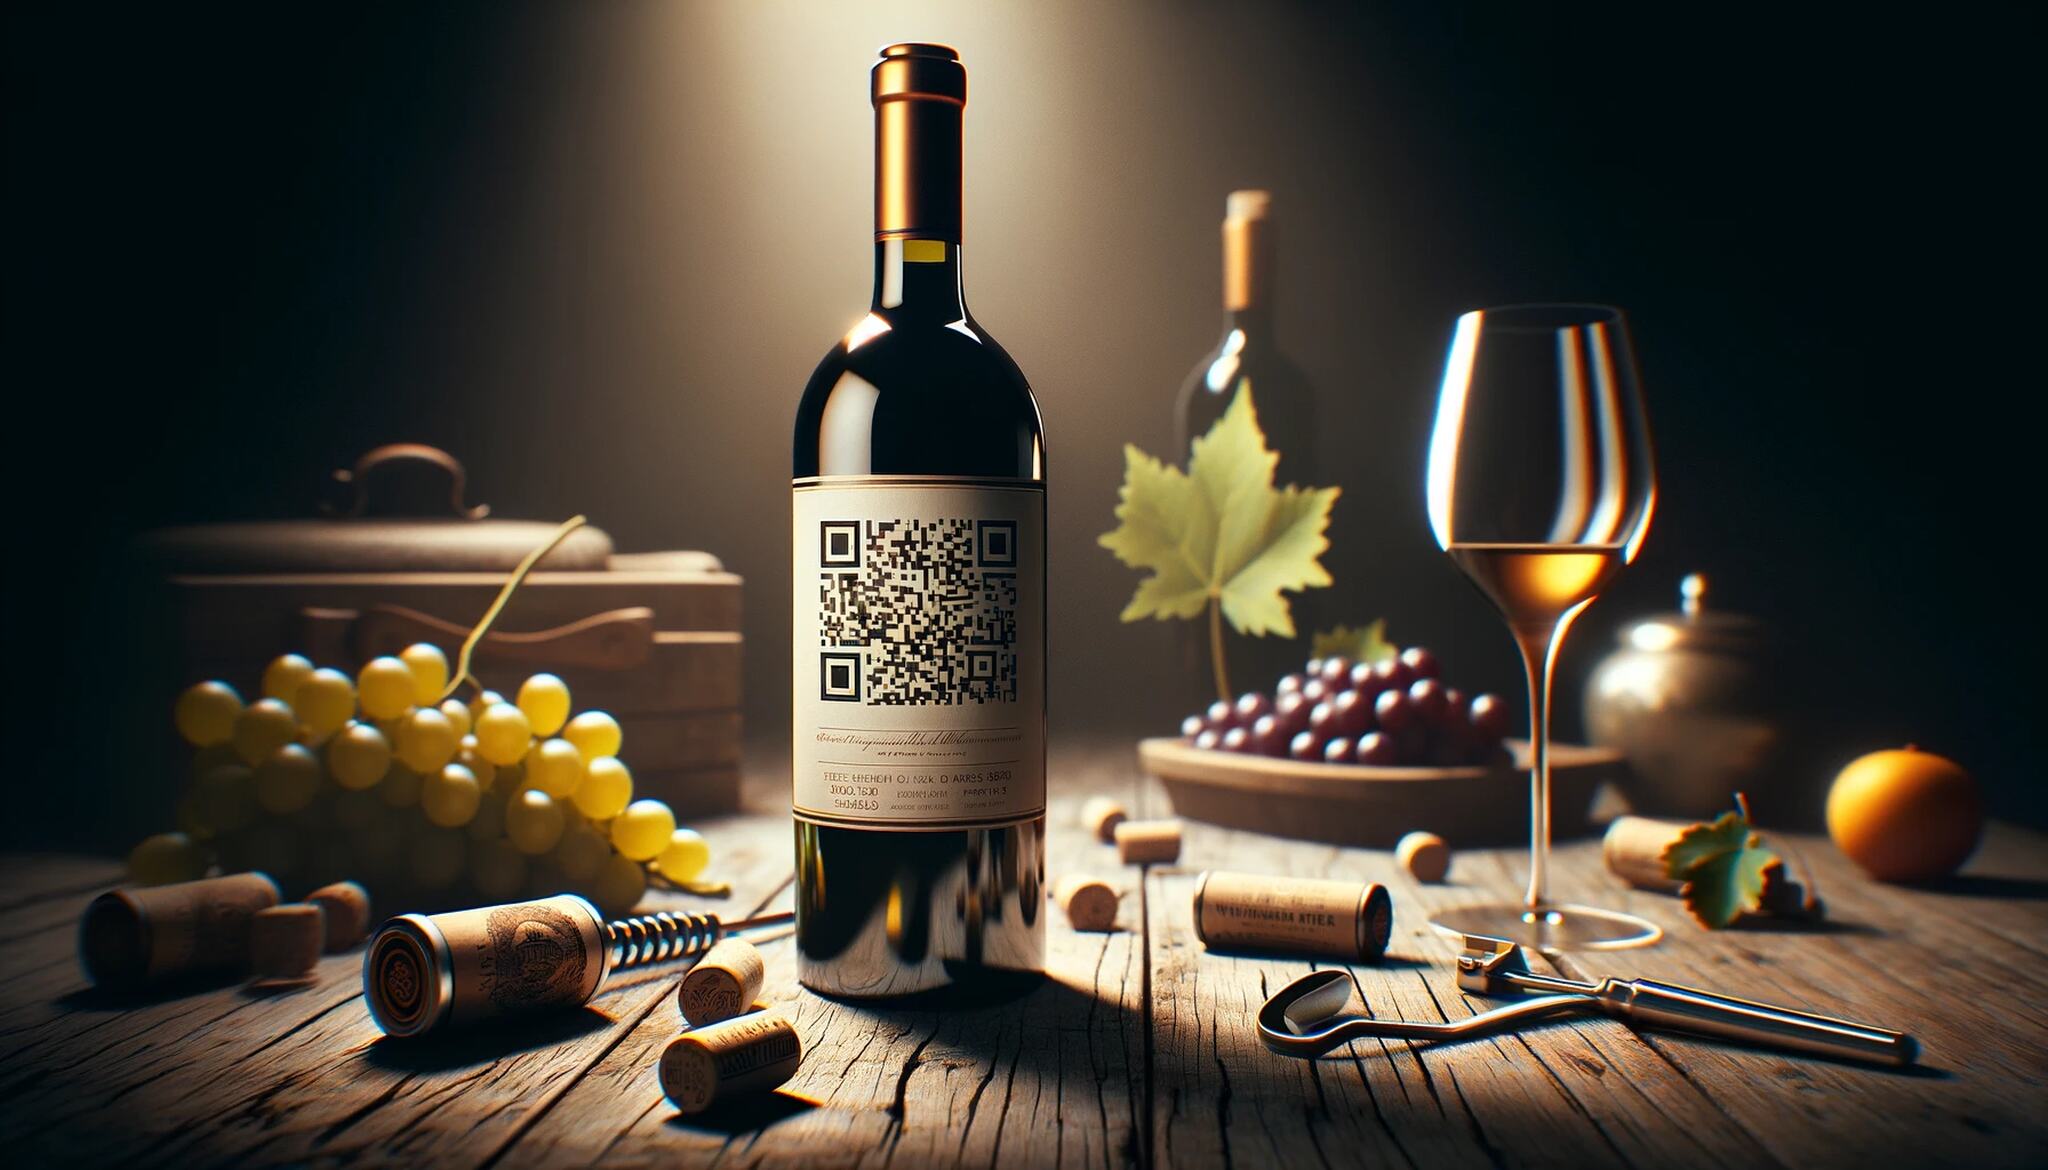 An elegant wine bottle with a label that features a QR code on a rustic wooden table